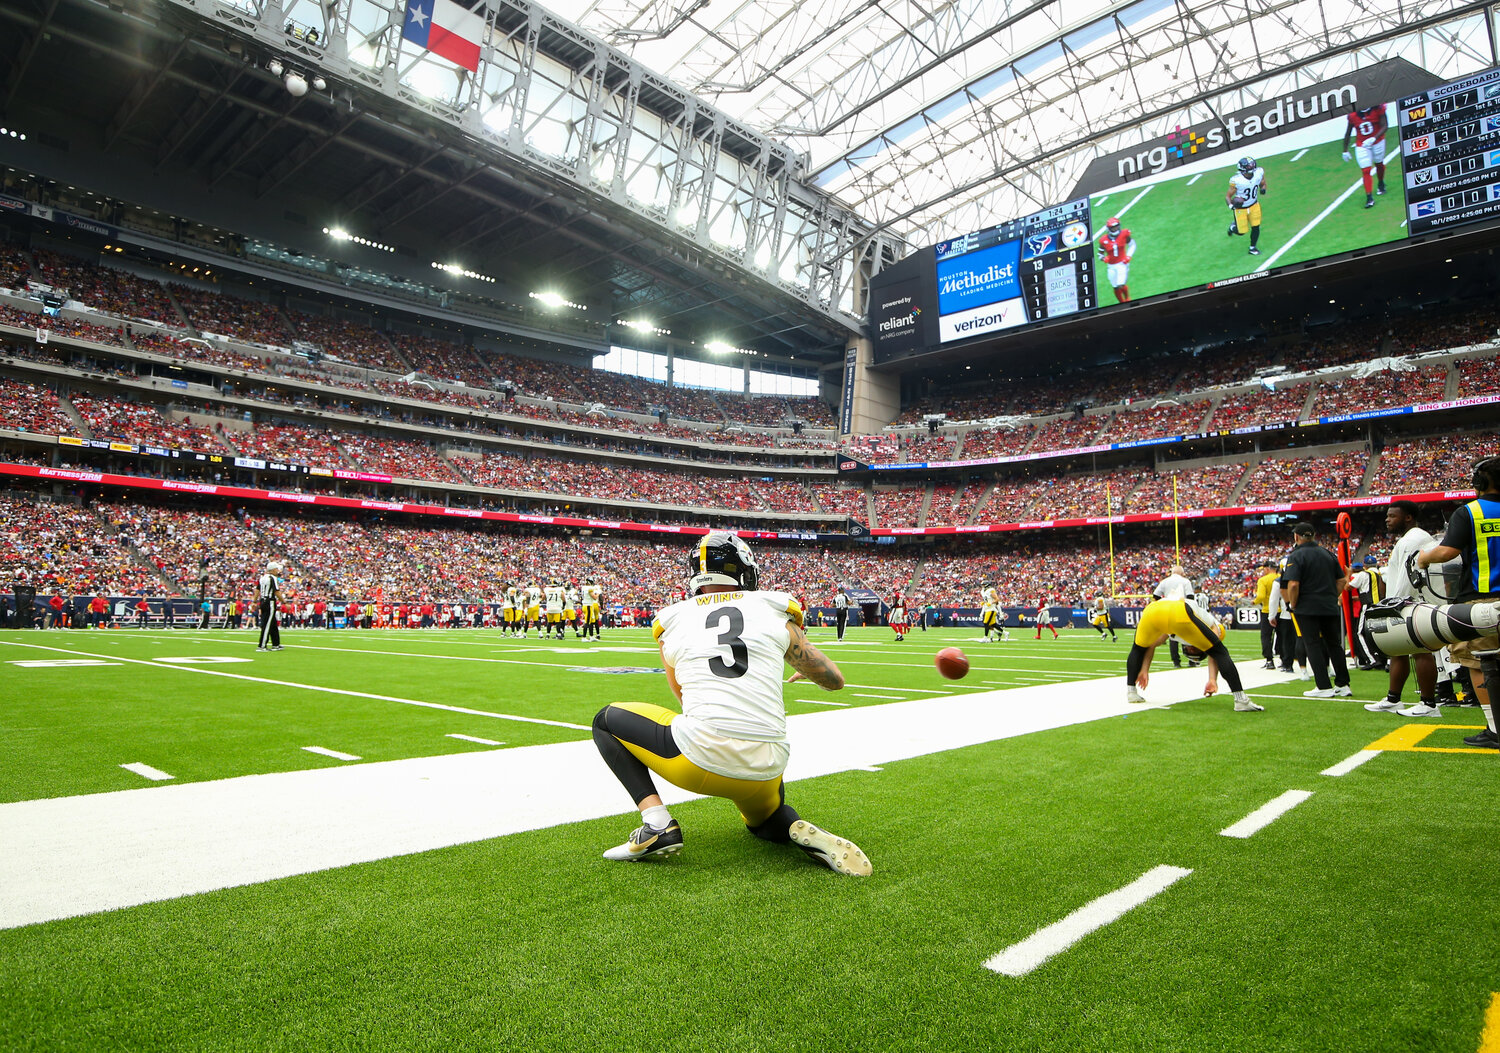 Steelers punter Brad Wing (3) practices holding for a field goal attempt on the sideline as time runs down in the first half of an NFL game between the Texans and the Steelers on October 1, 2023 in Houston.